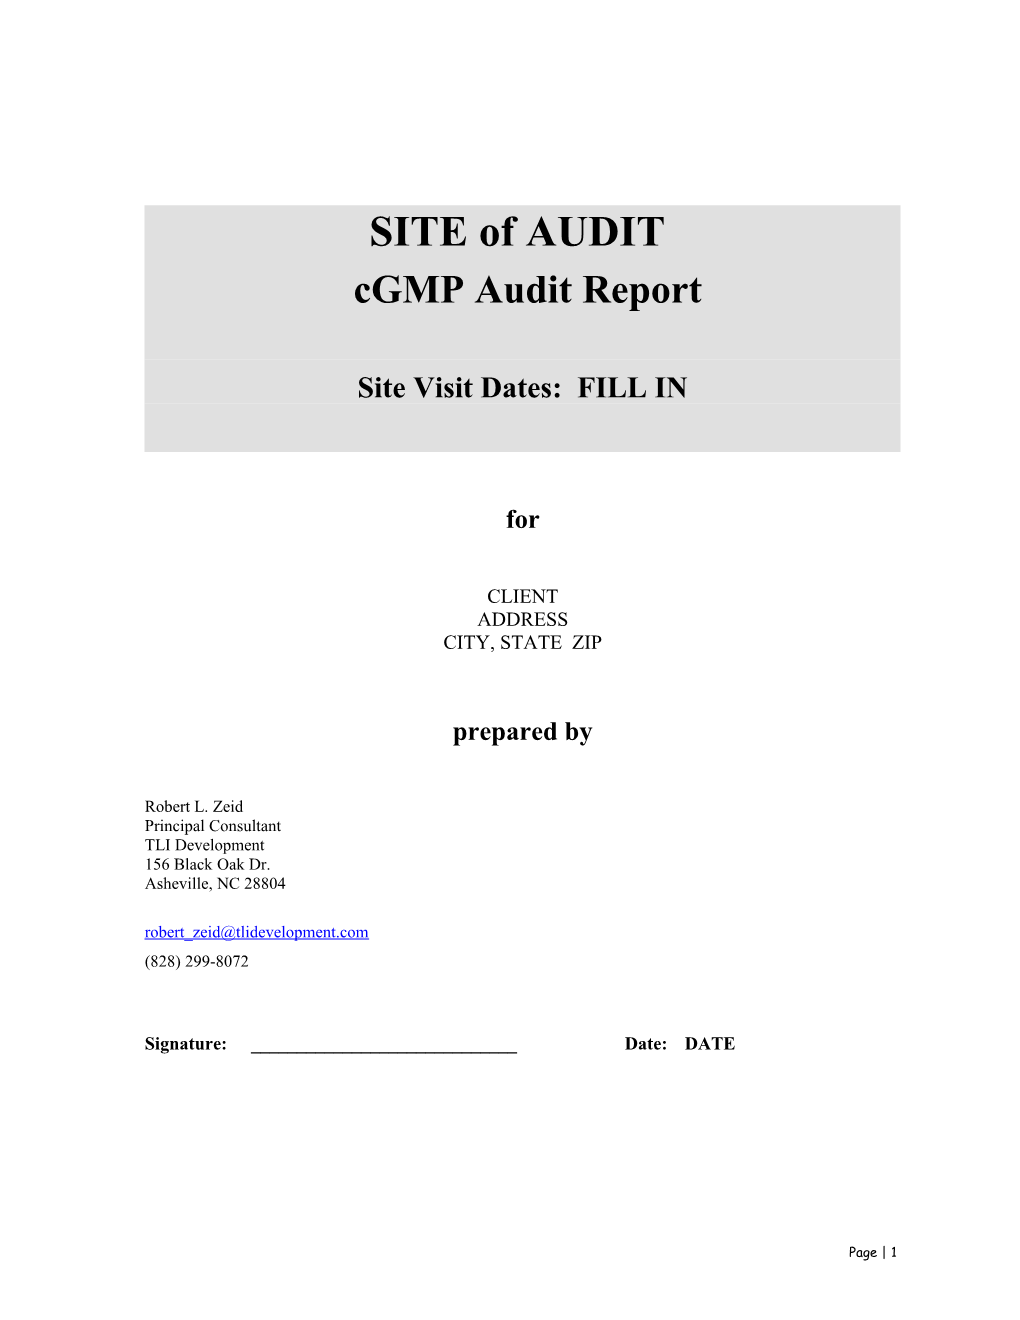 Audit Report with GMP Questionnaire